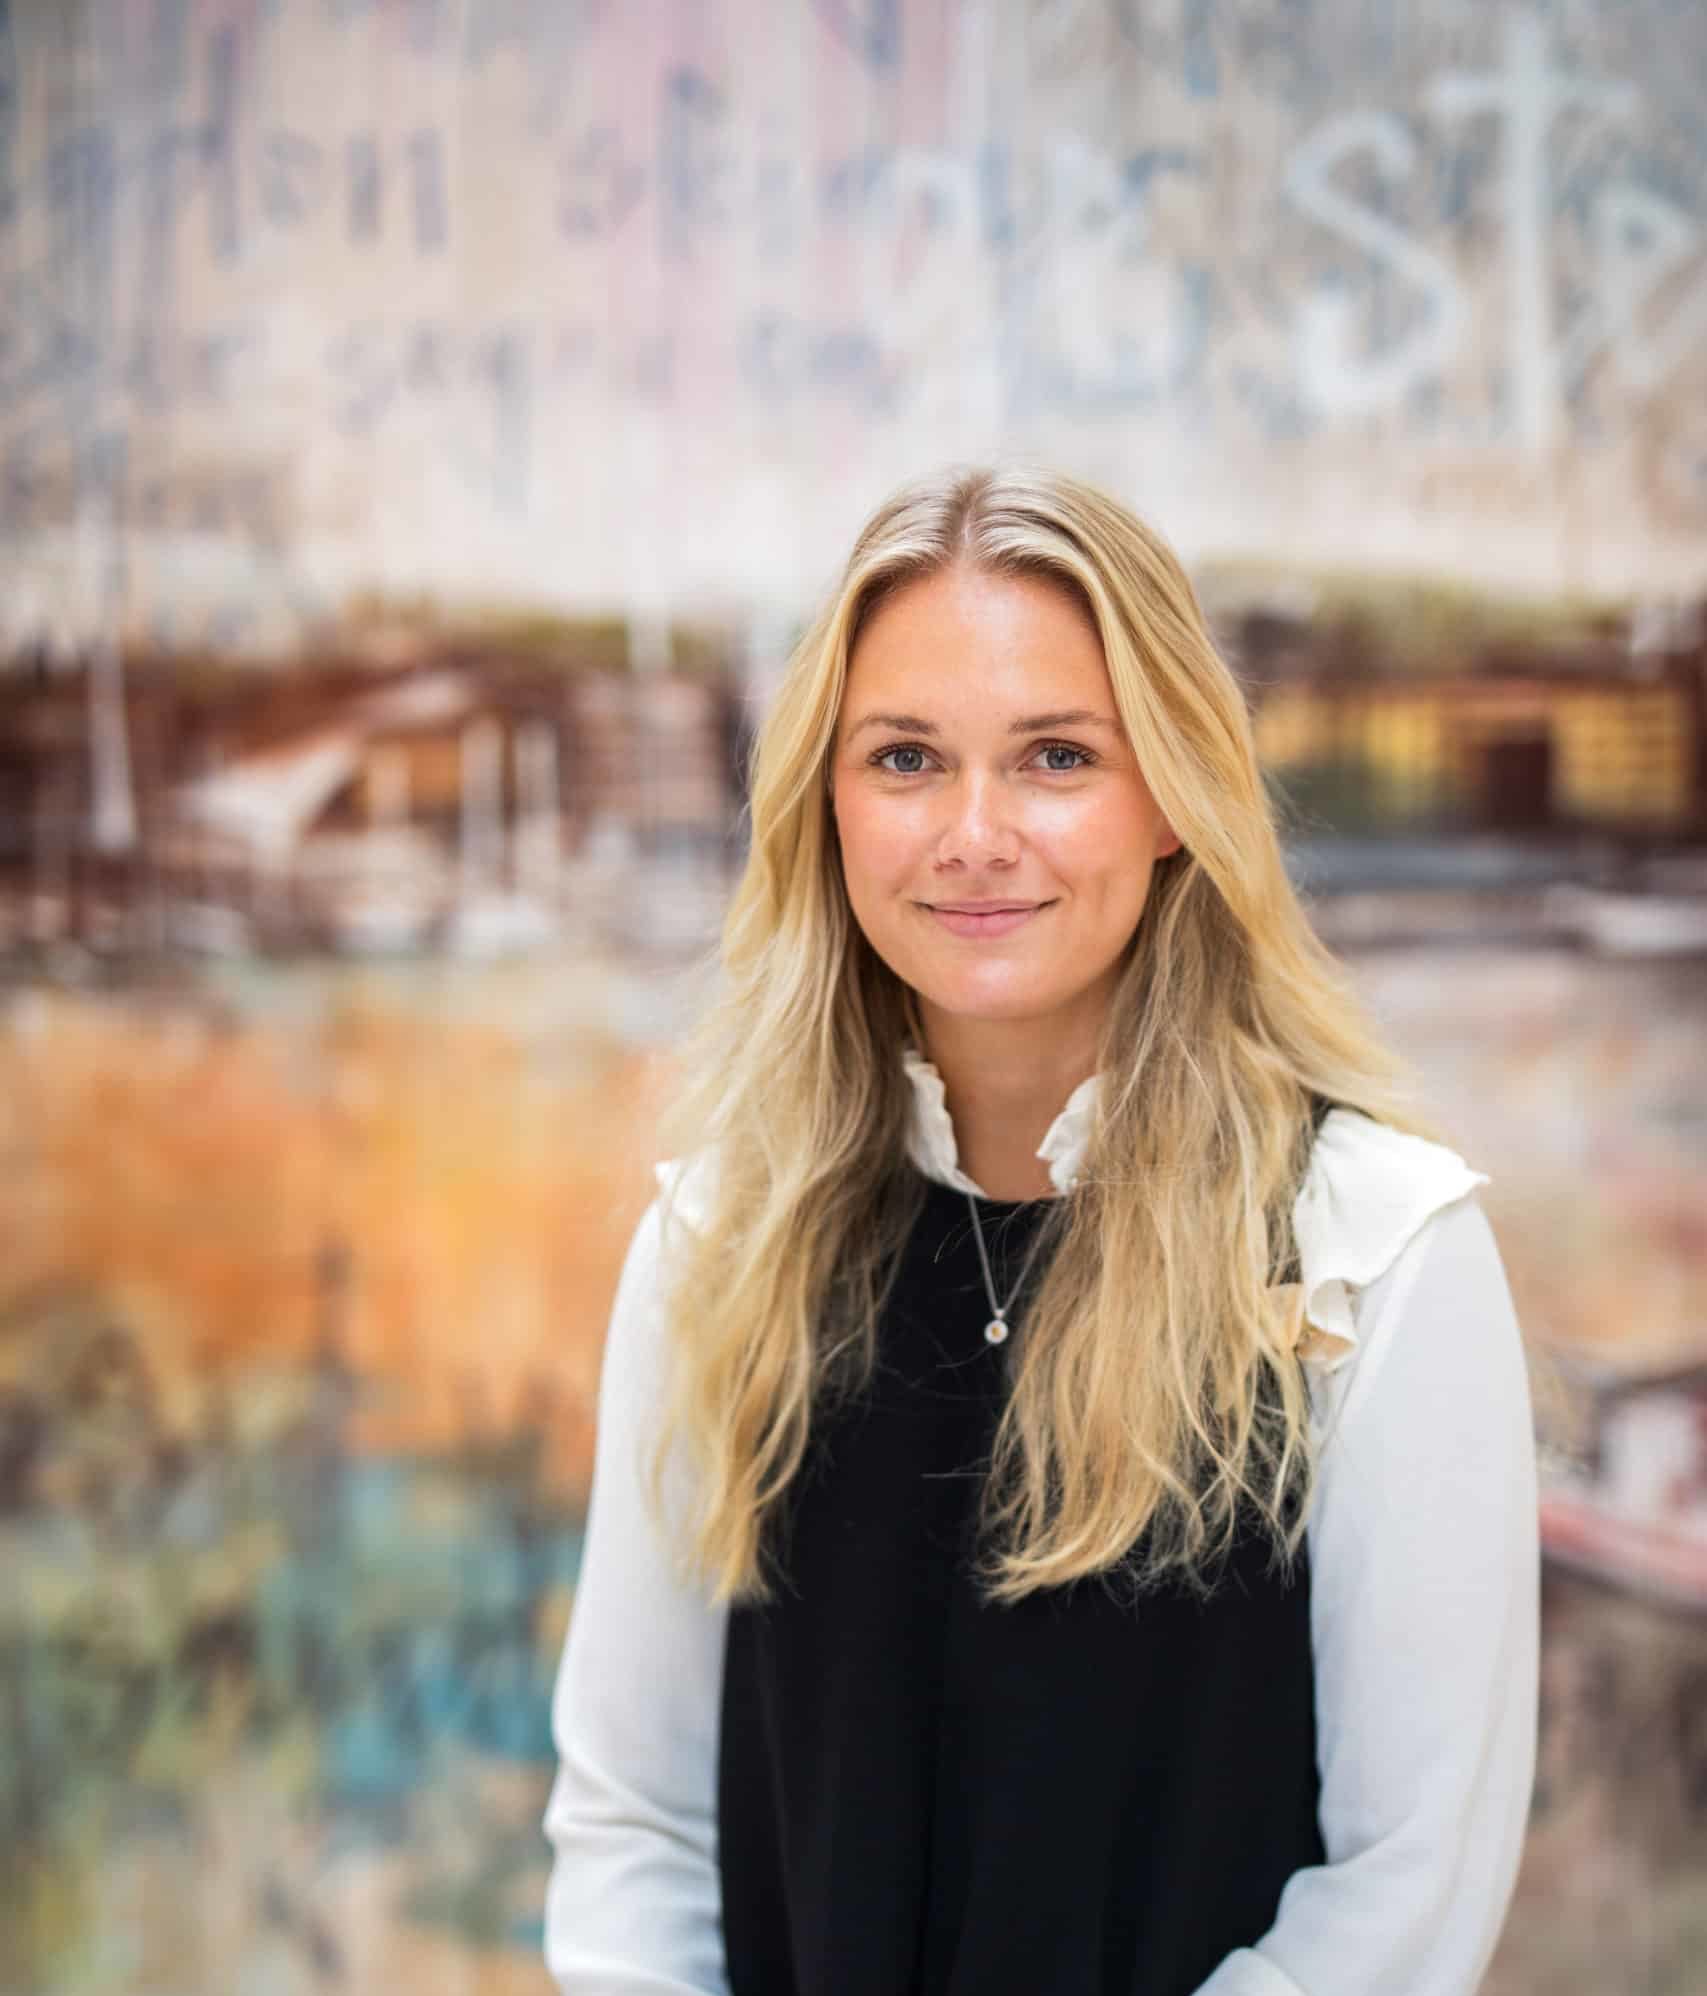 Vilde Lyngstad Hageselle, a blonde woman who works with sustainability in the shipping industry.